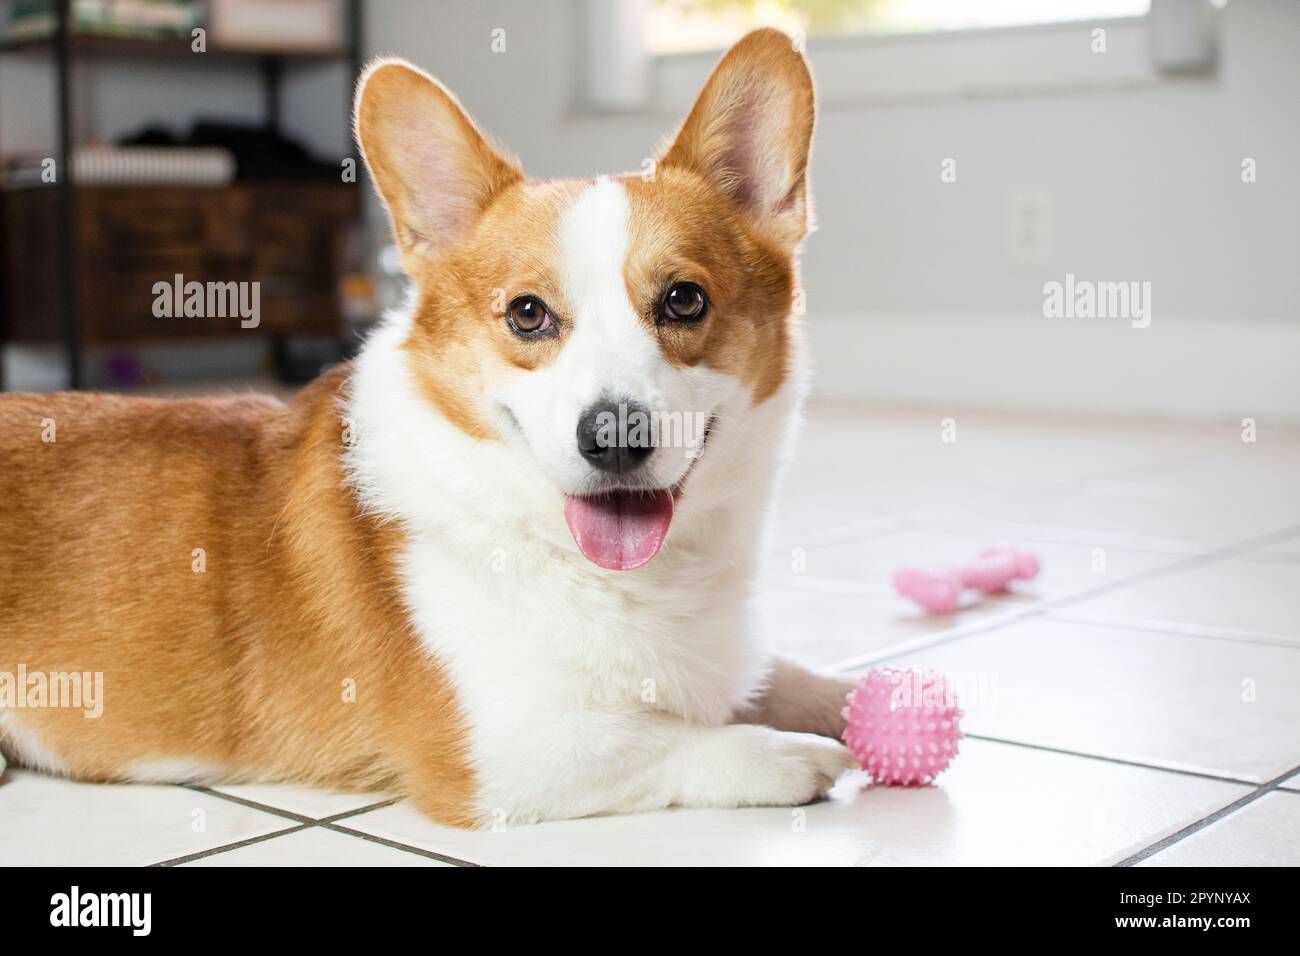 Portrait of Welsh Pembroke Corgi dog looking at the camera and playing with a pink toy ball. Stock Photo